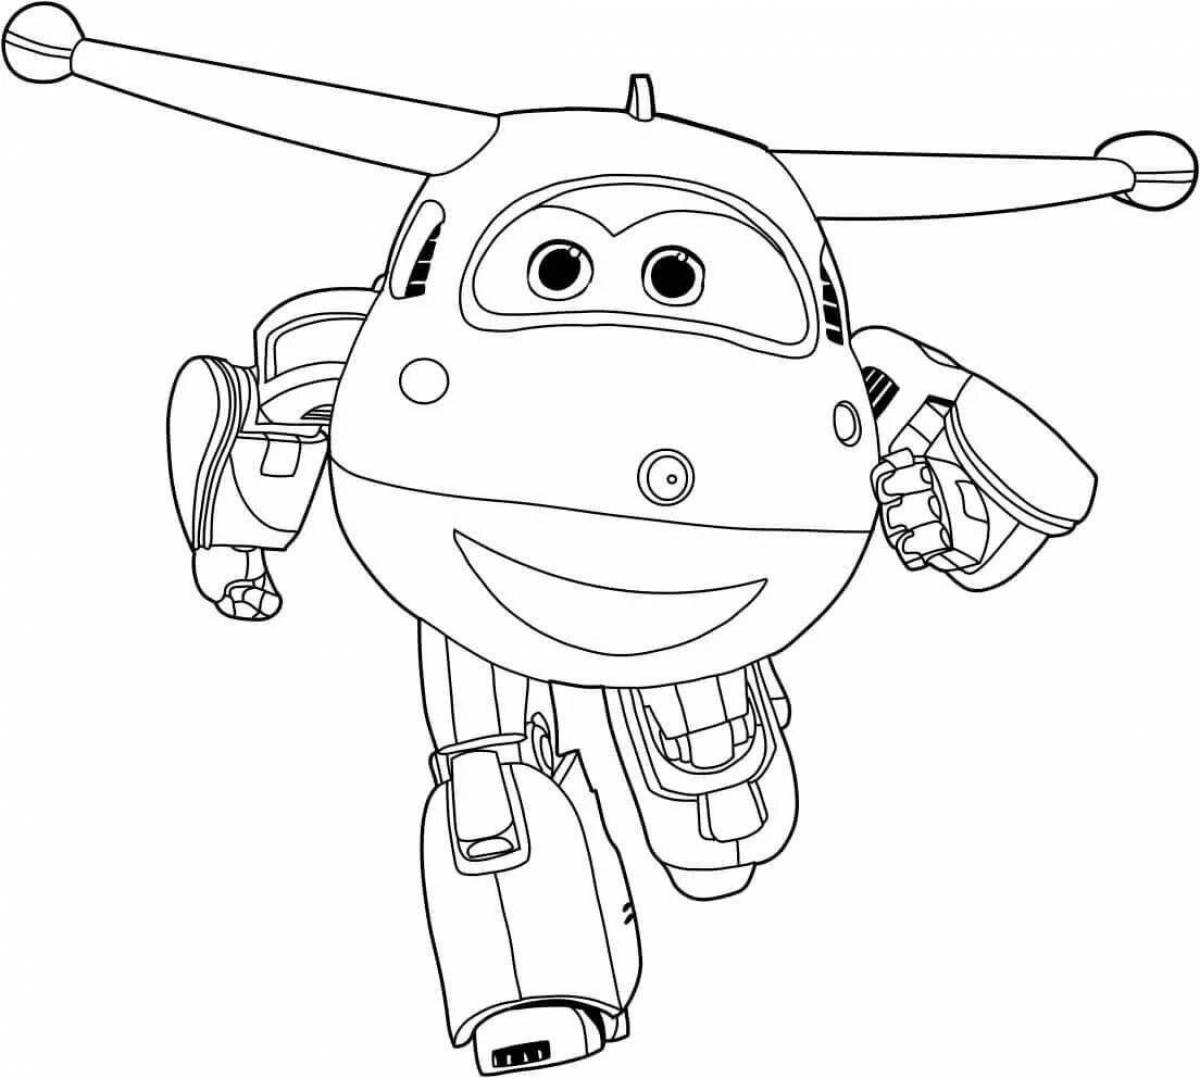 Amazing superjet coloring page